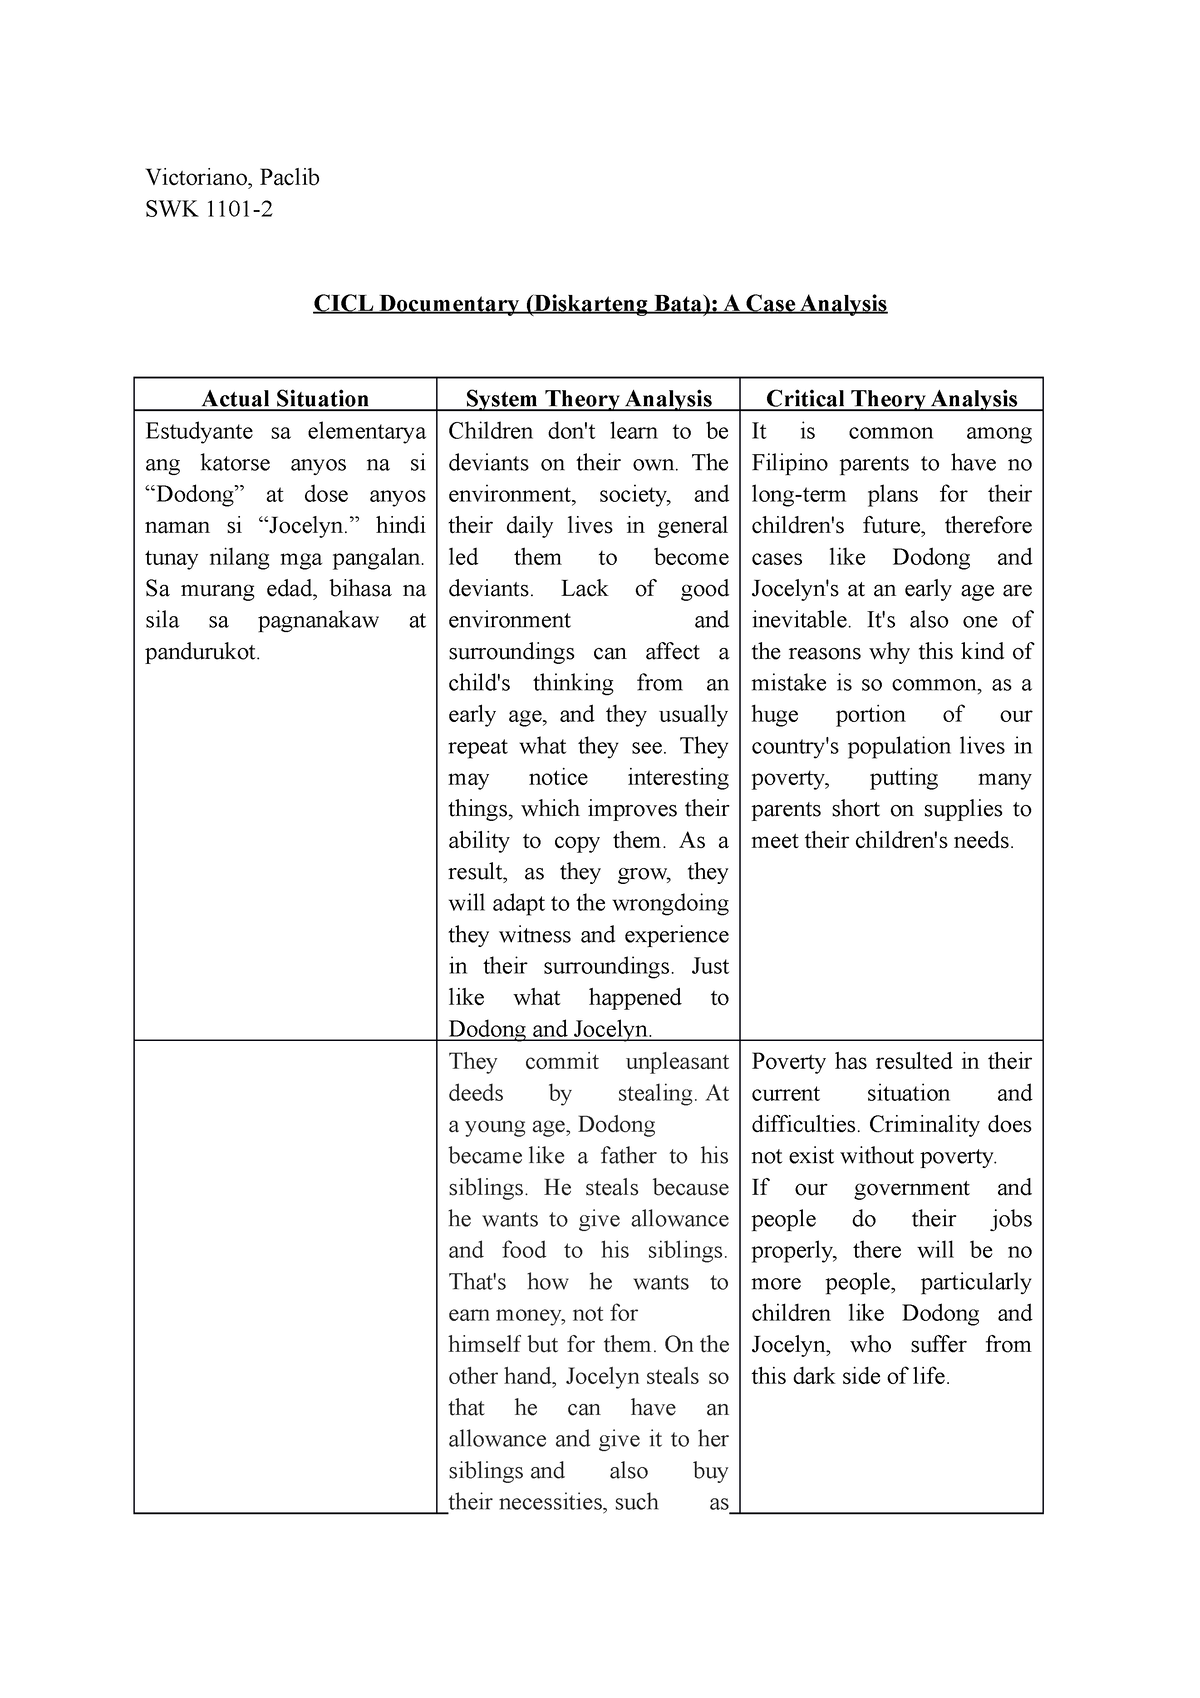 cicl case study report